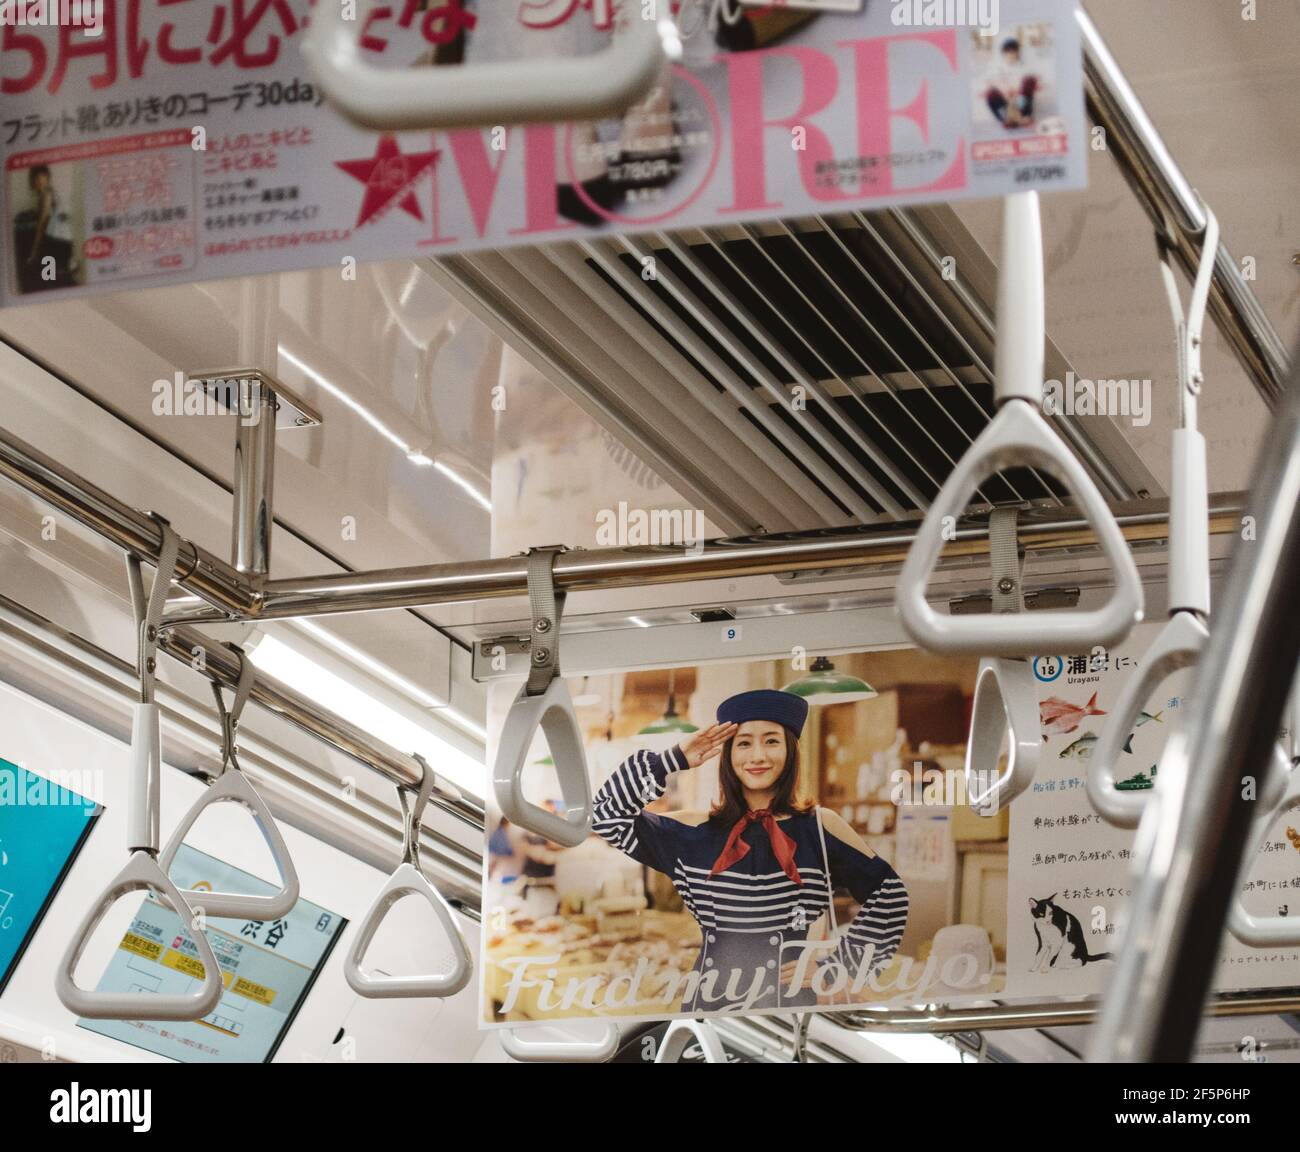 Tokyo, Japan - Satomi Ishihara, Japanese actress in Tokyo Metro campaign banner hanging from the ceiling. Stock Photo